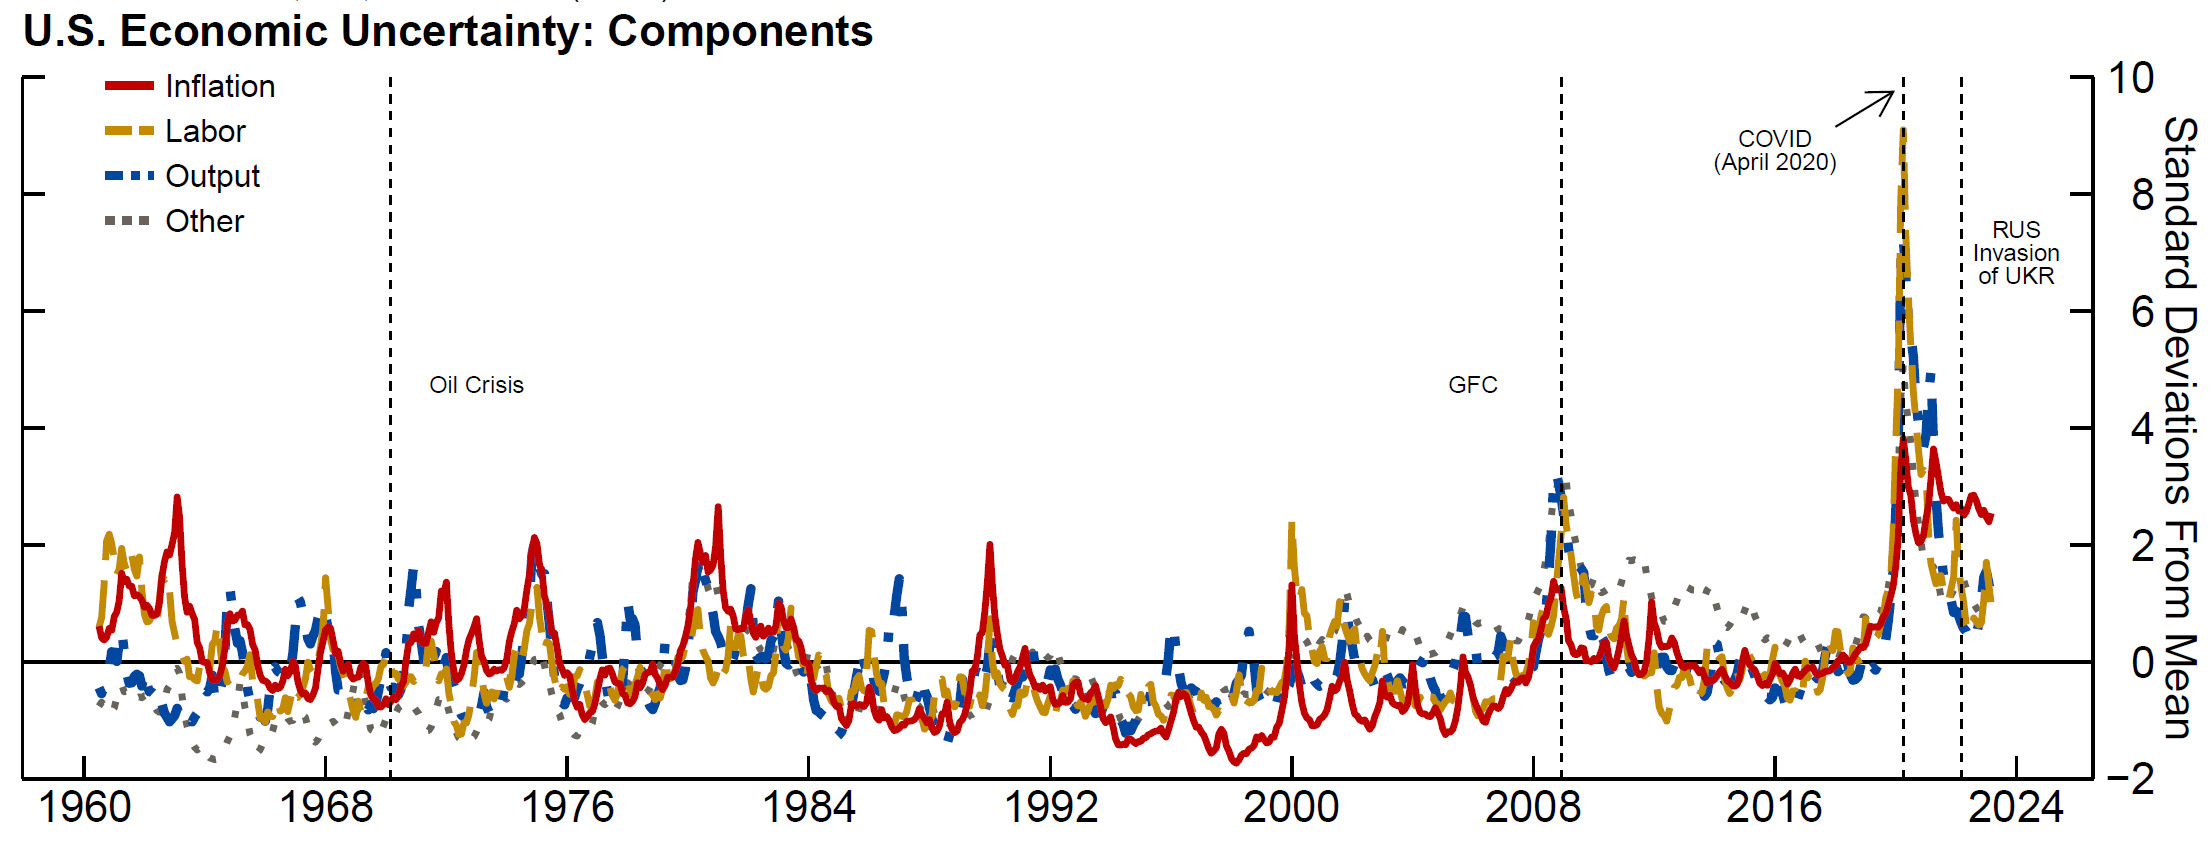 Figure 4. U.S. Economic Uncertainty: Components. See accessible link for data.